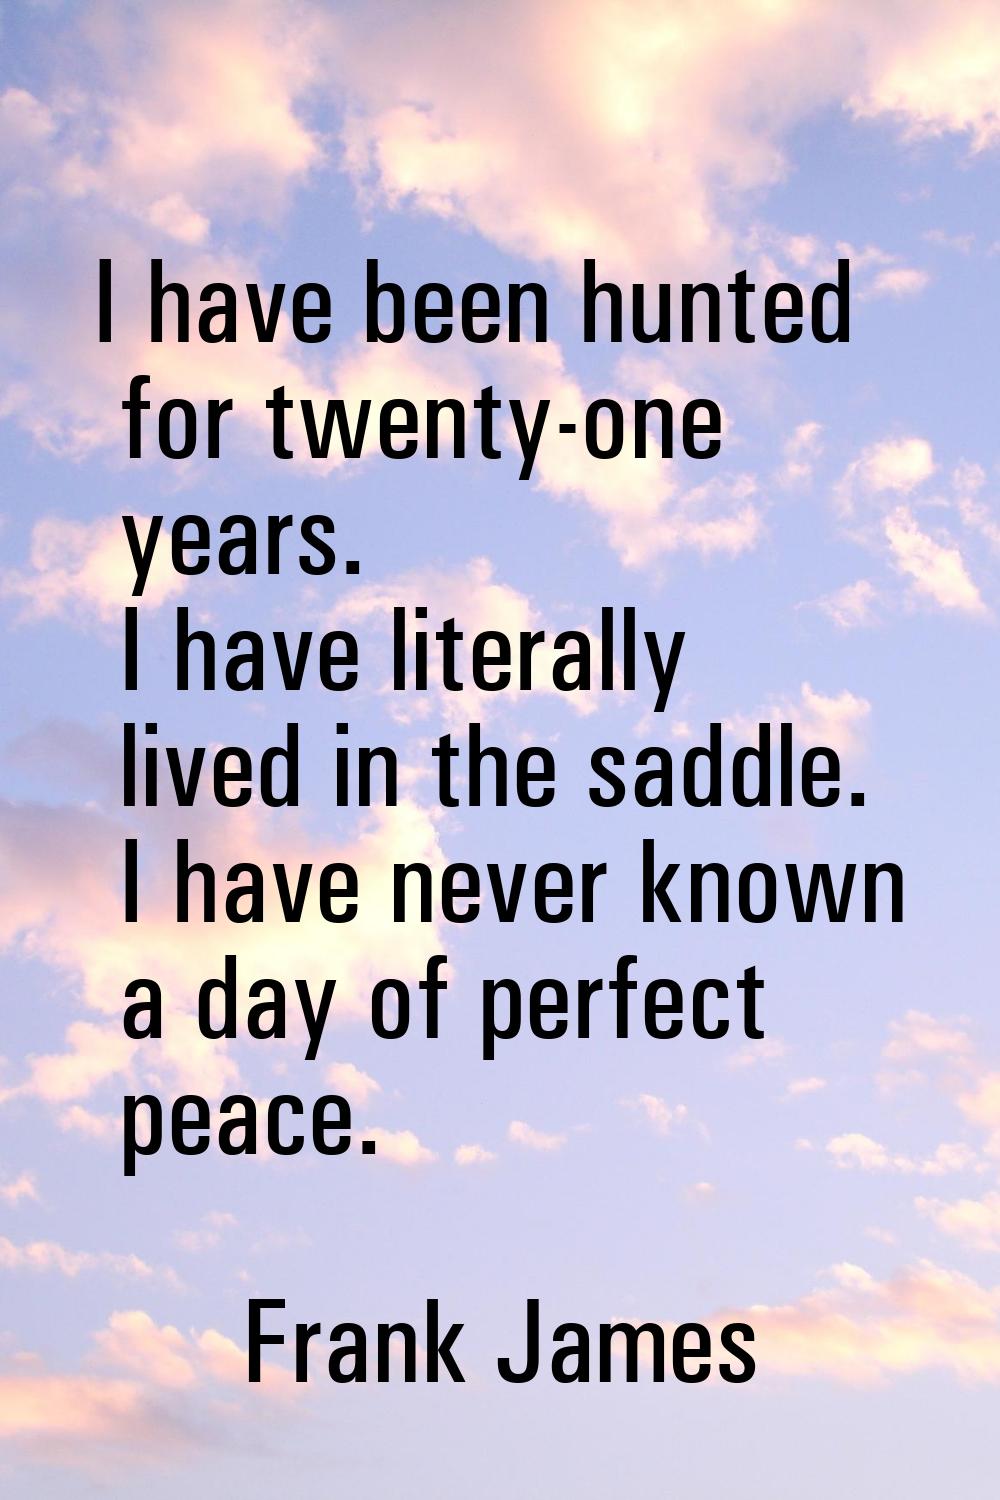 I have been hunted for twenty-one years. I have literally lived in the saddle. I have never known a